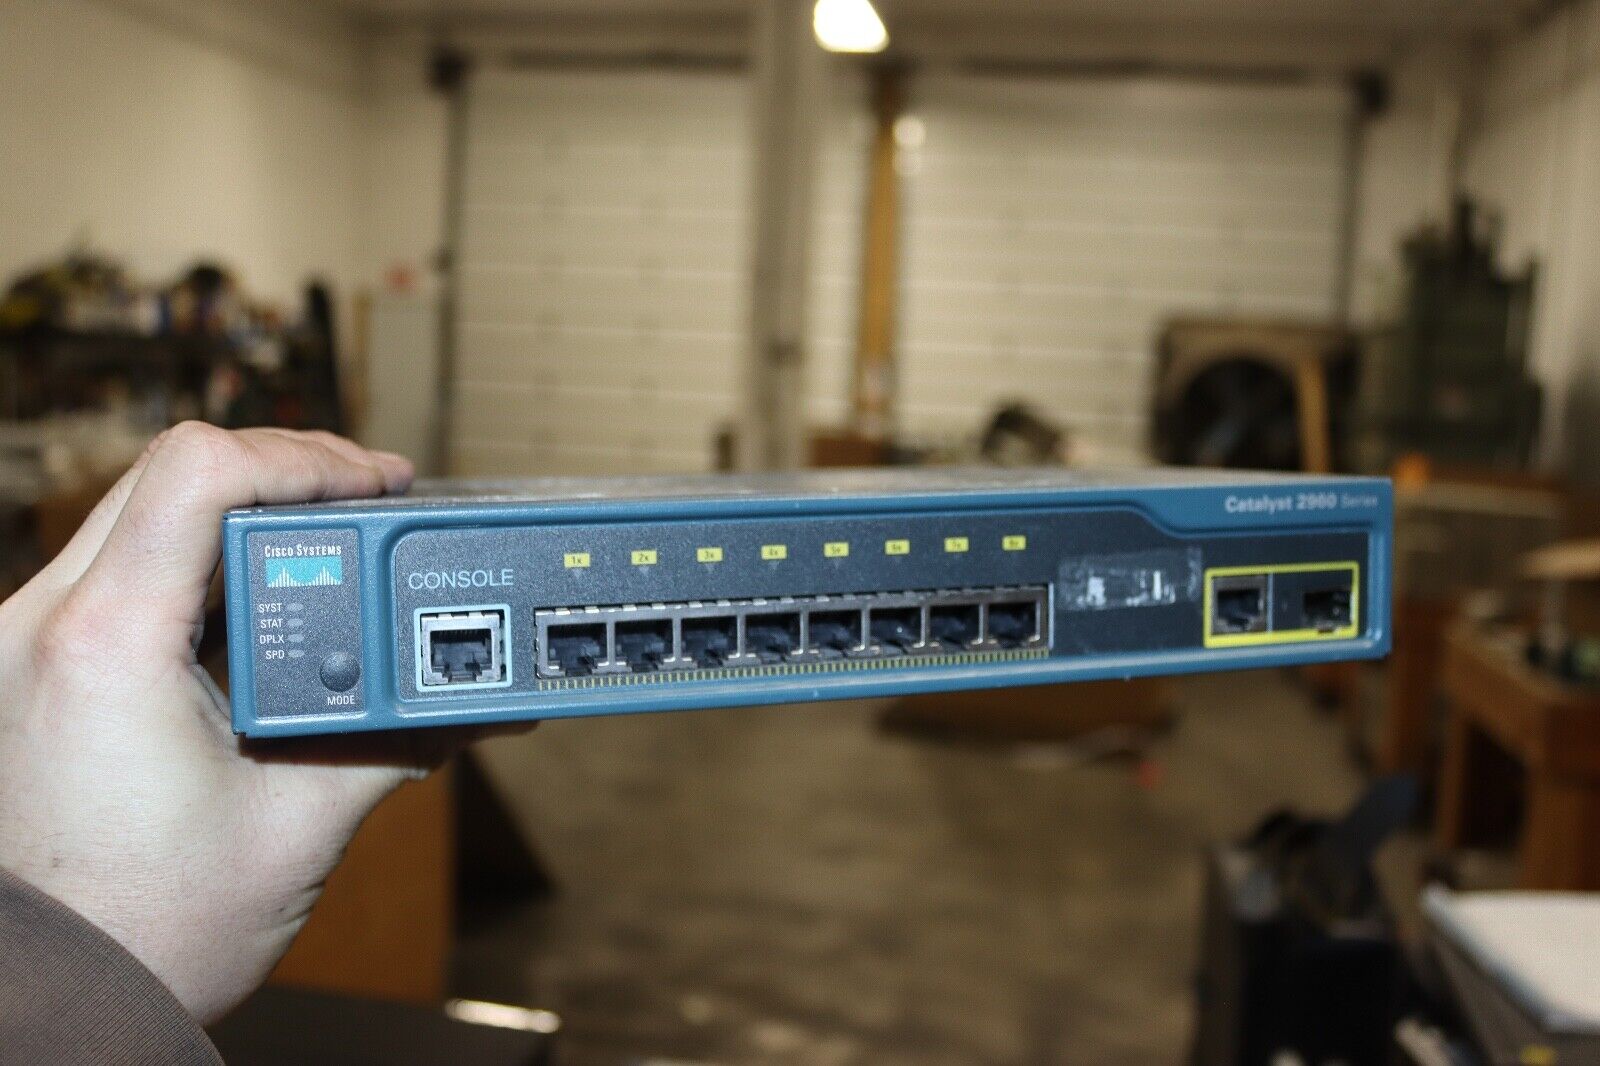 Cisco Catalyst WS-C2960-8TC-L 8 Port Fast Ethernet Managed Network Switch